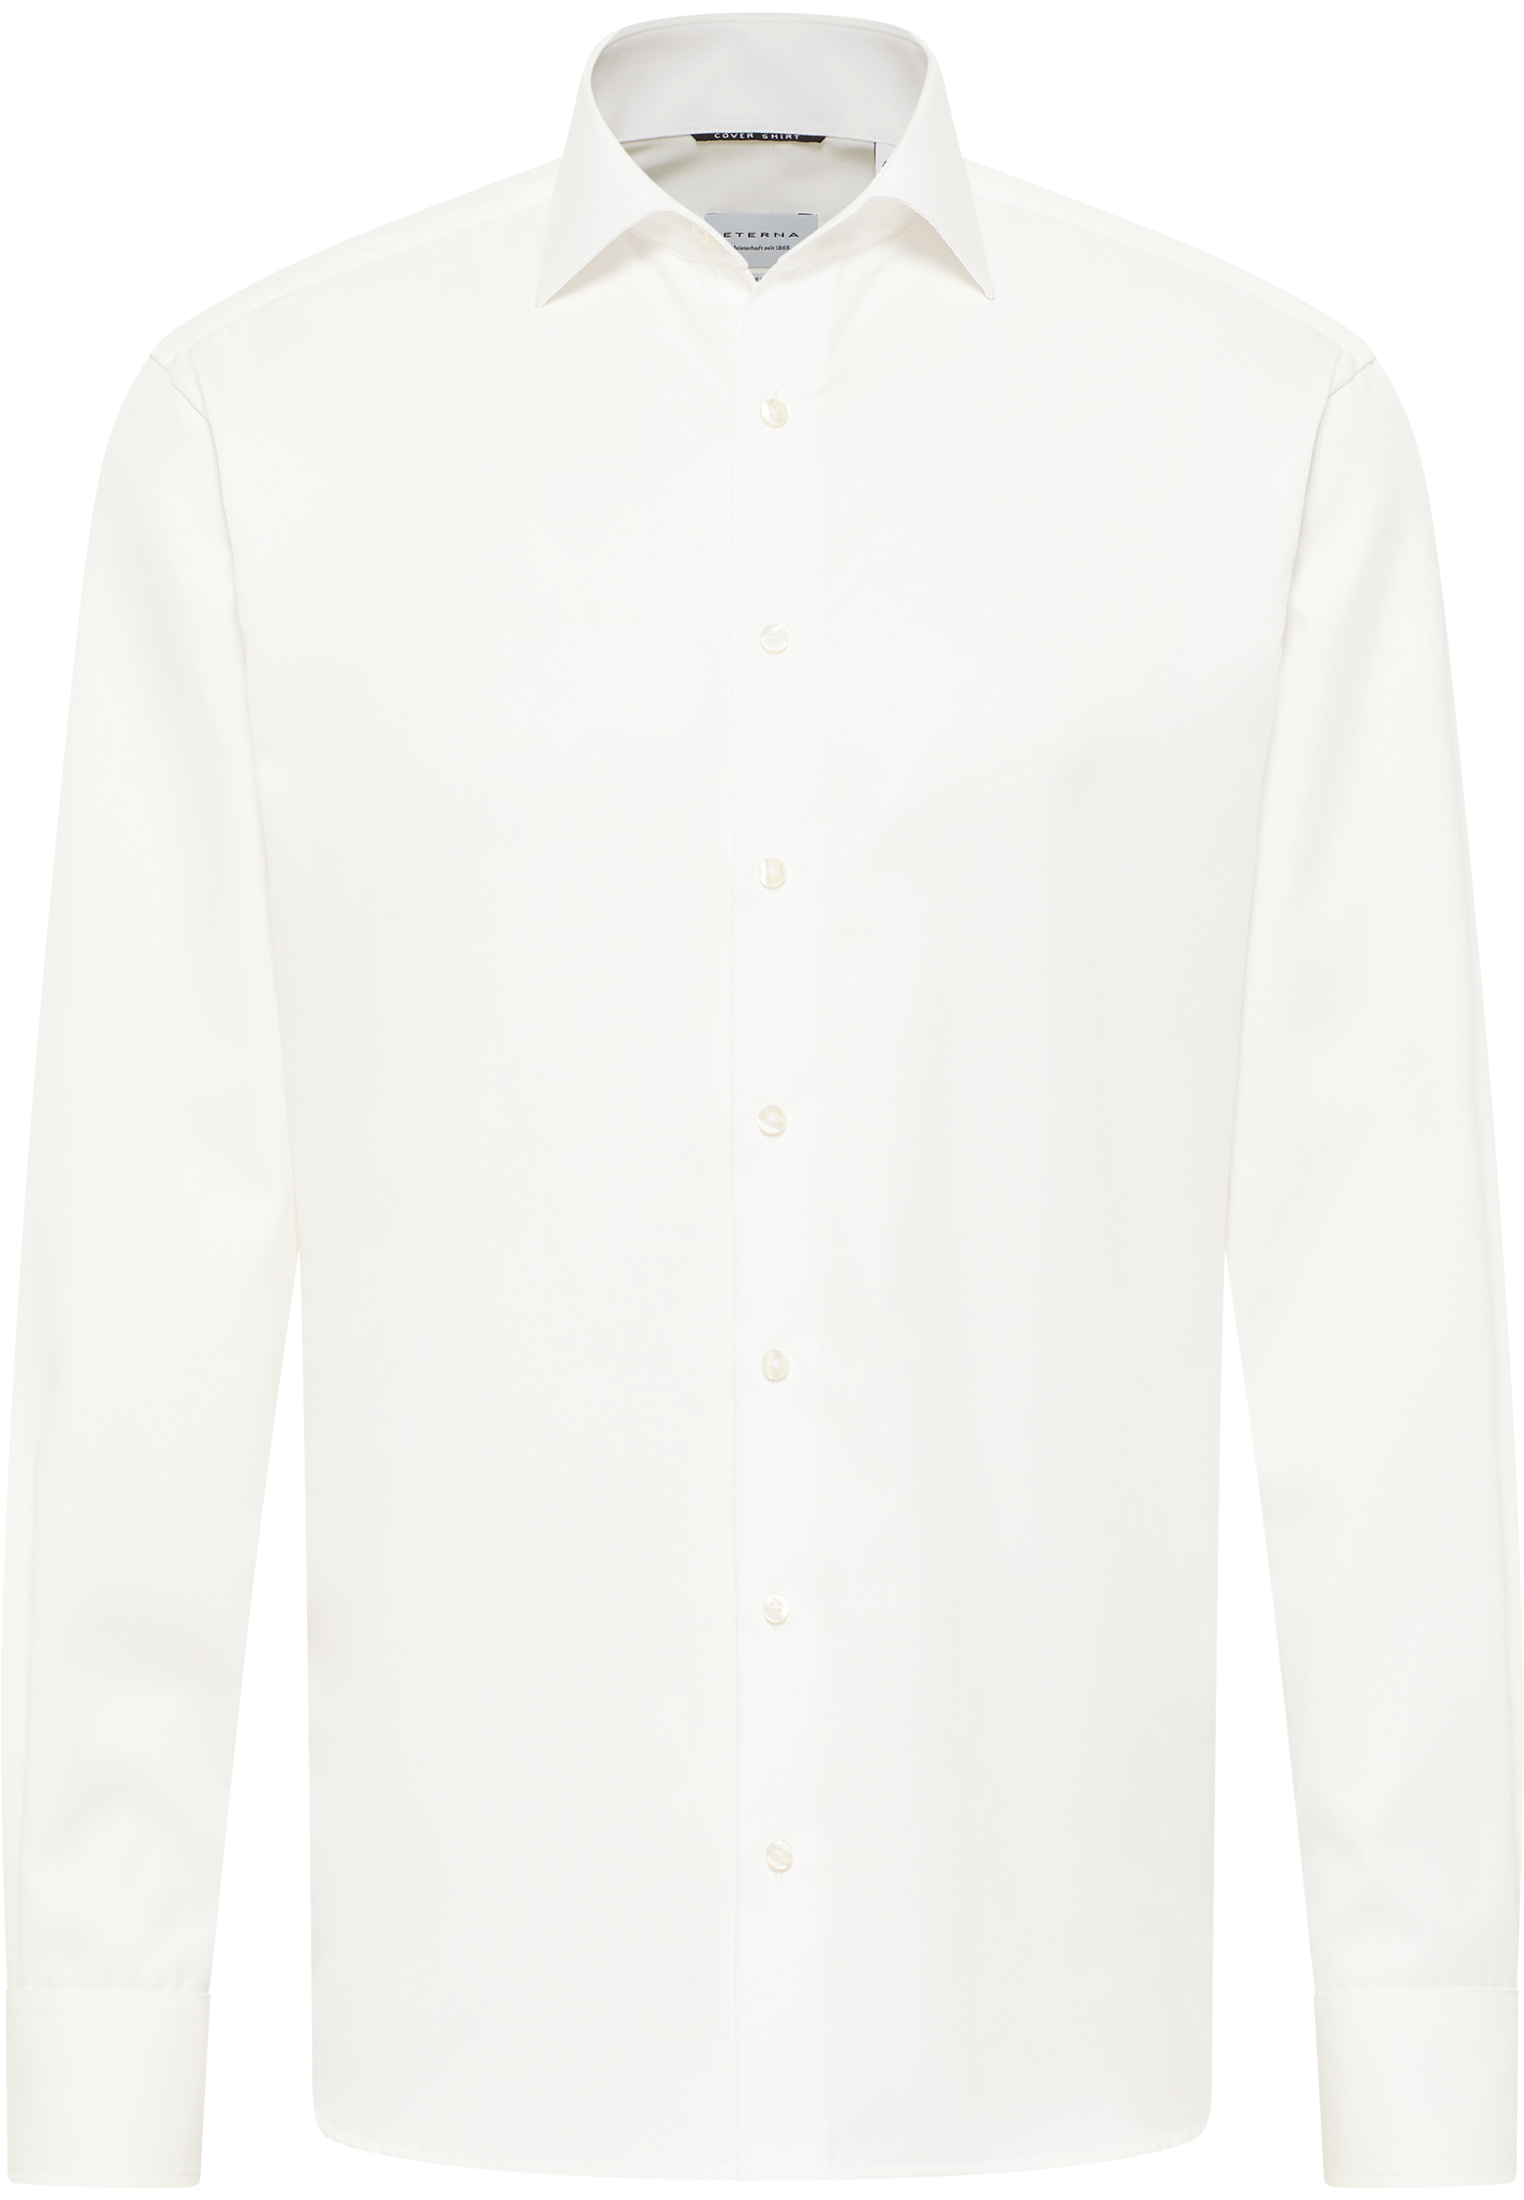 MODERN FIT Cover Shirt in beige plain